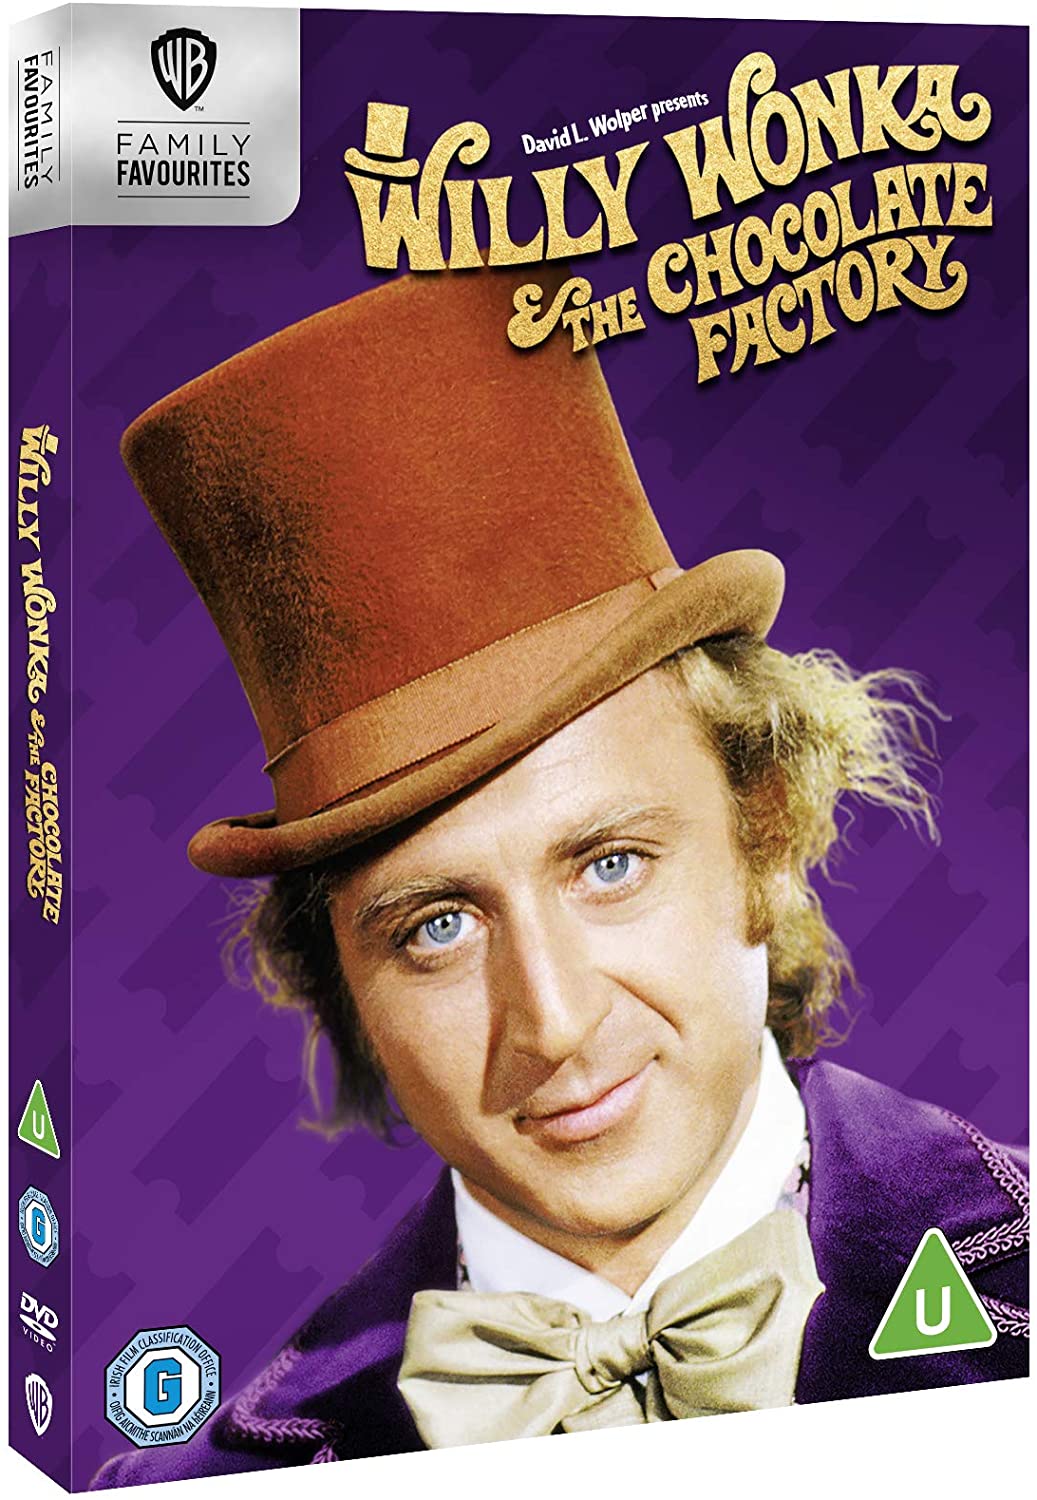 Charlie and the Chocolate Factory - Fantasy/Family [DVD]